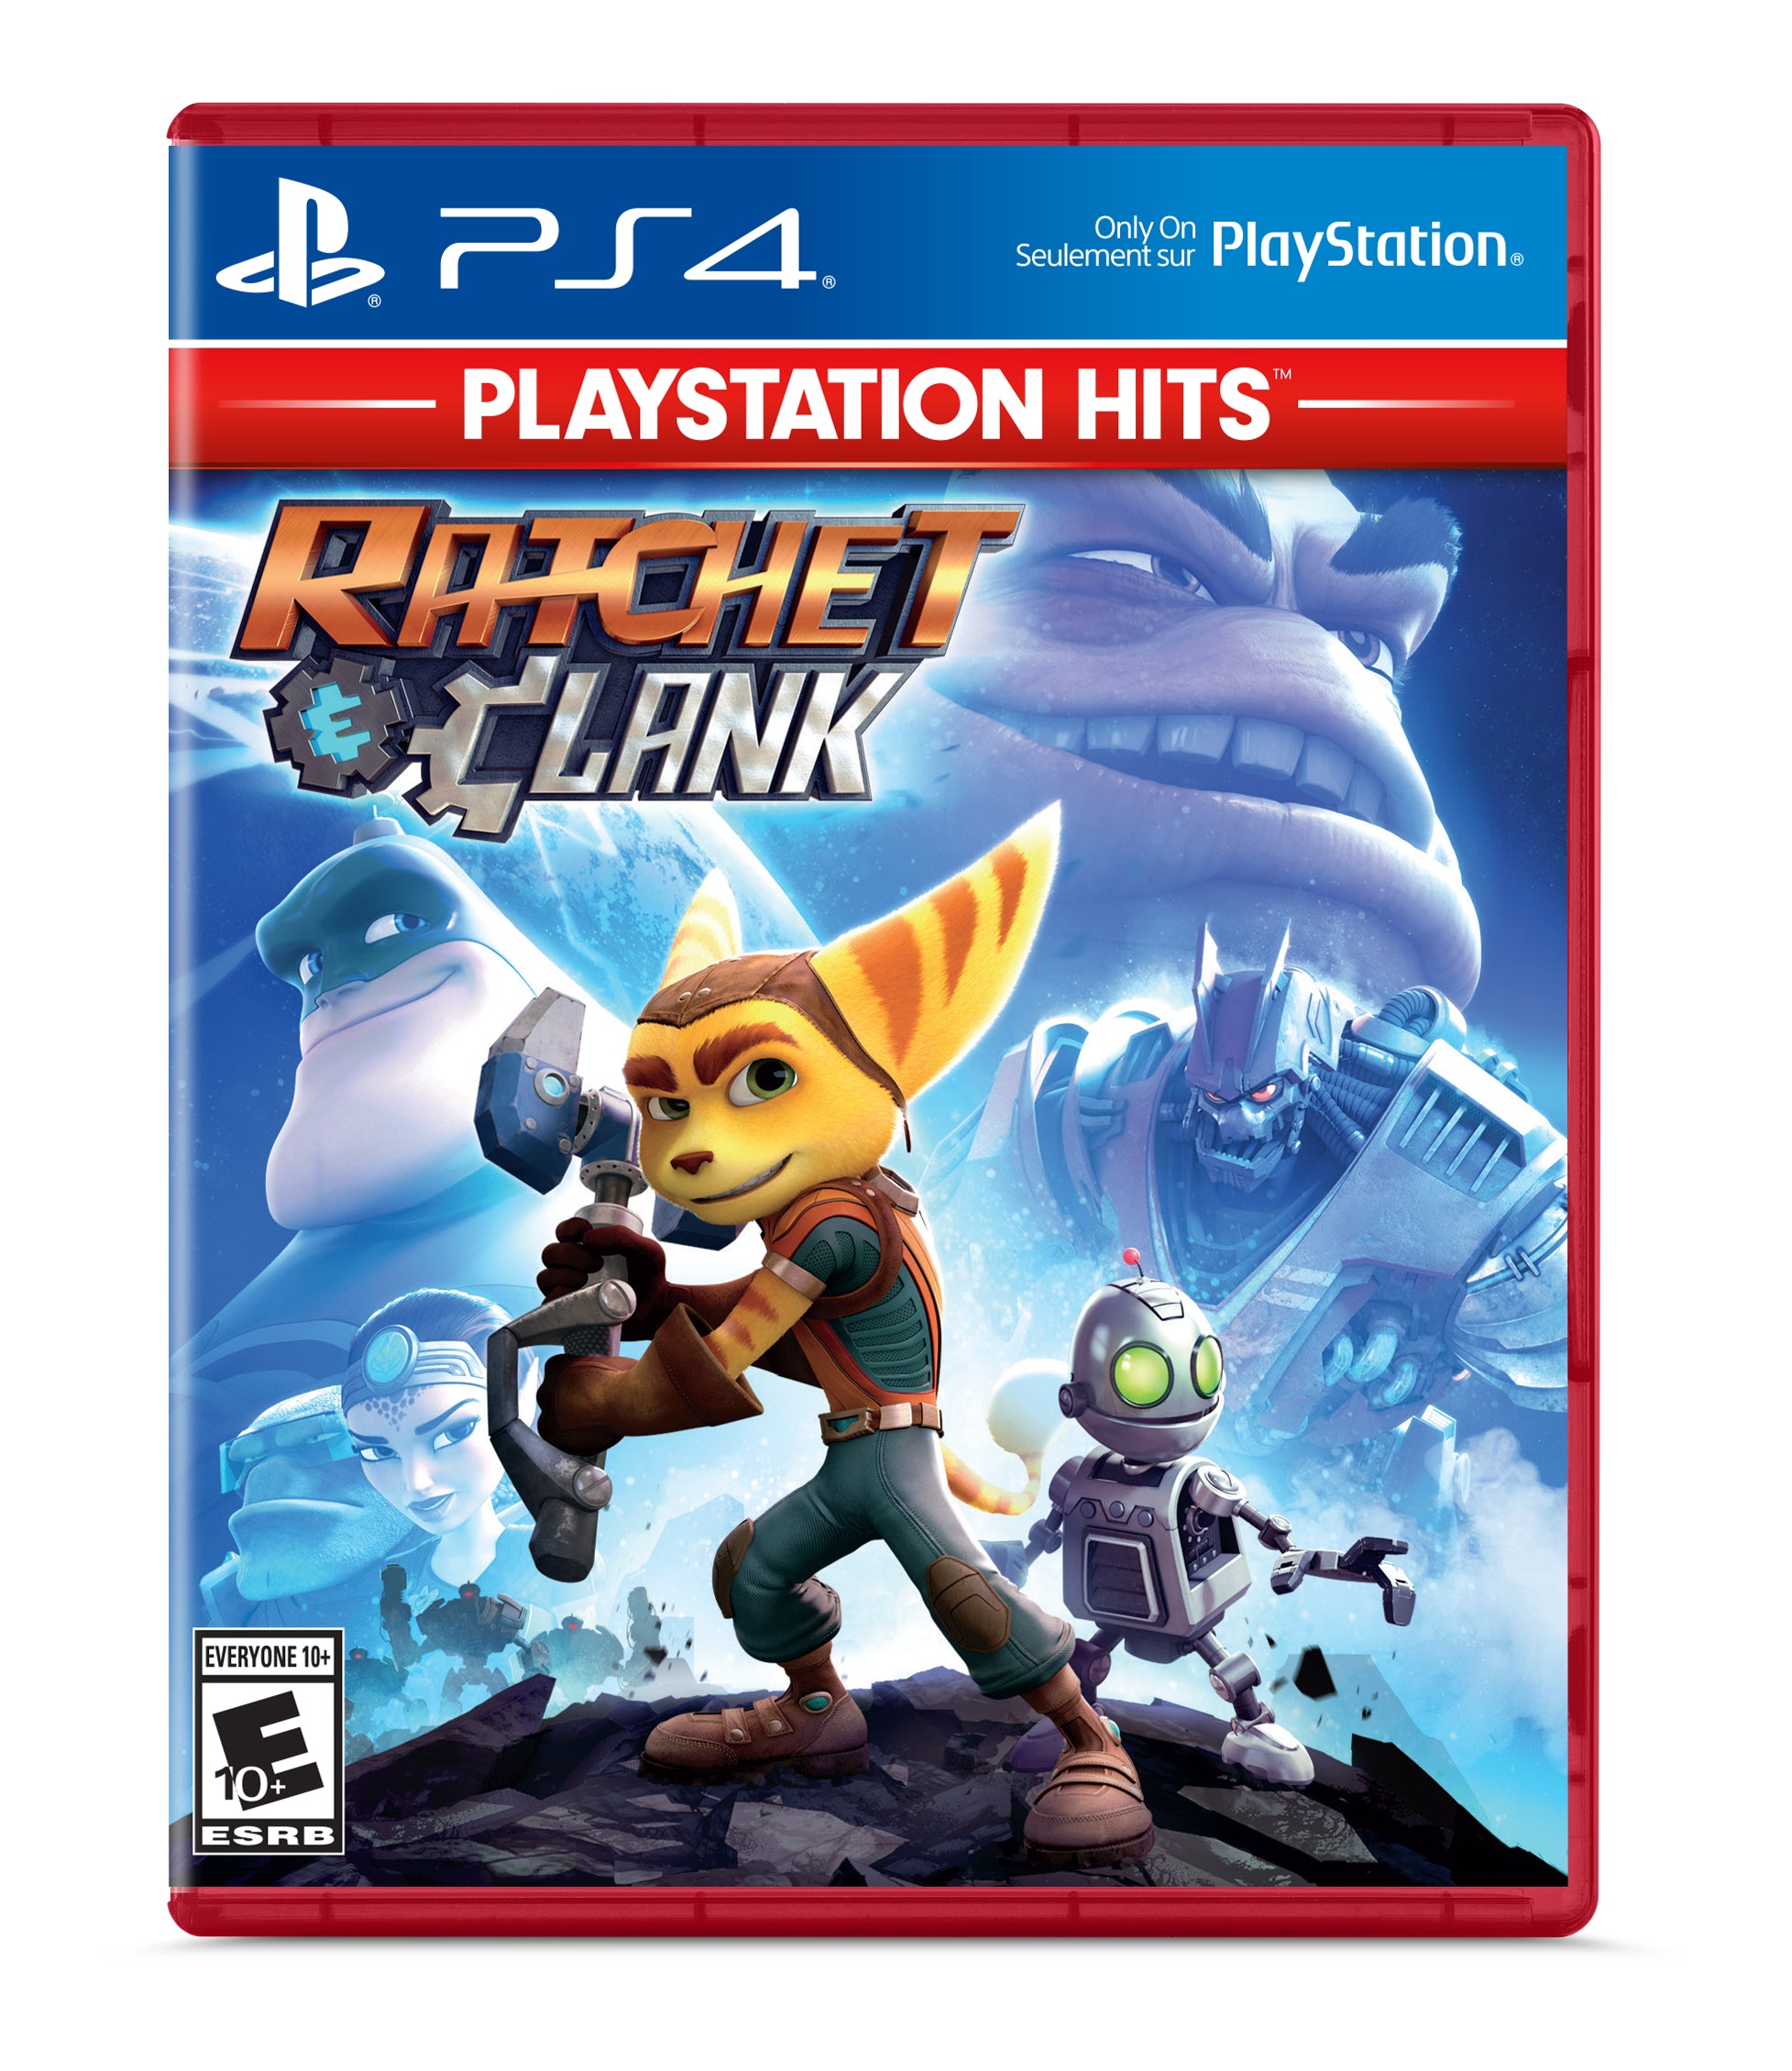 Sony PlayStation 4 Slim Ratchet & Clank Bundle Upgrade 2TB HDD PS4 Gaming Console, Jet Black, with Mytrix Chat Headset - Large Capacity Internal Hard Drive Enhanced PS4 Console